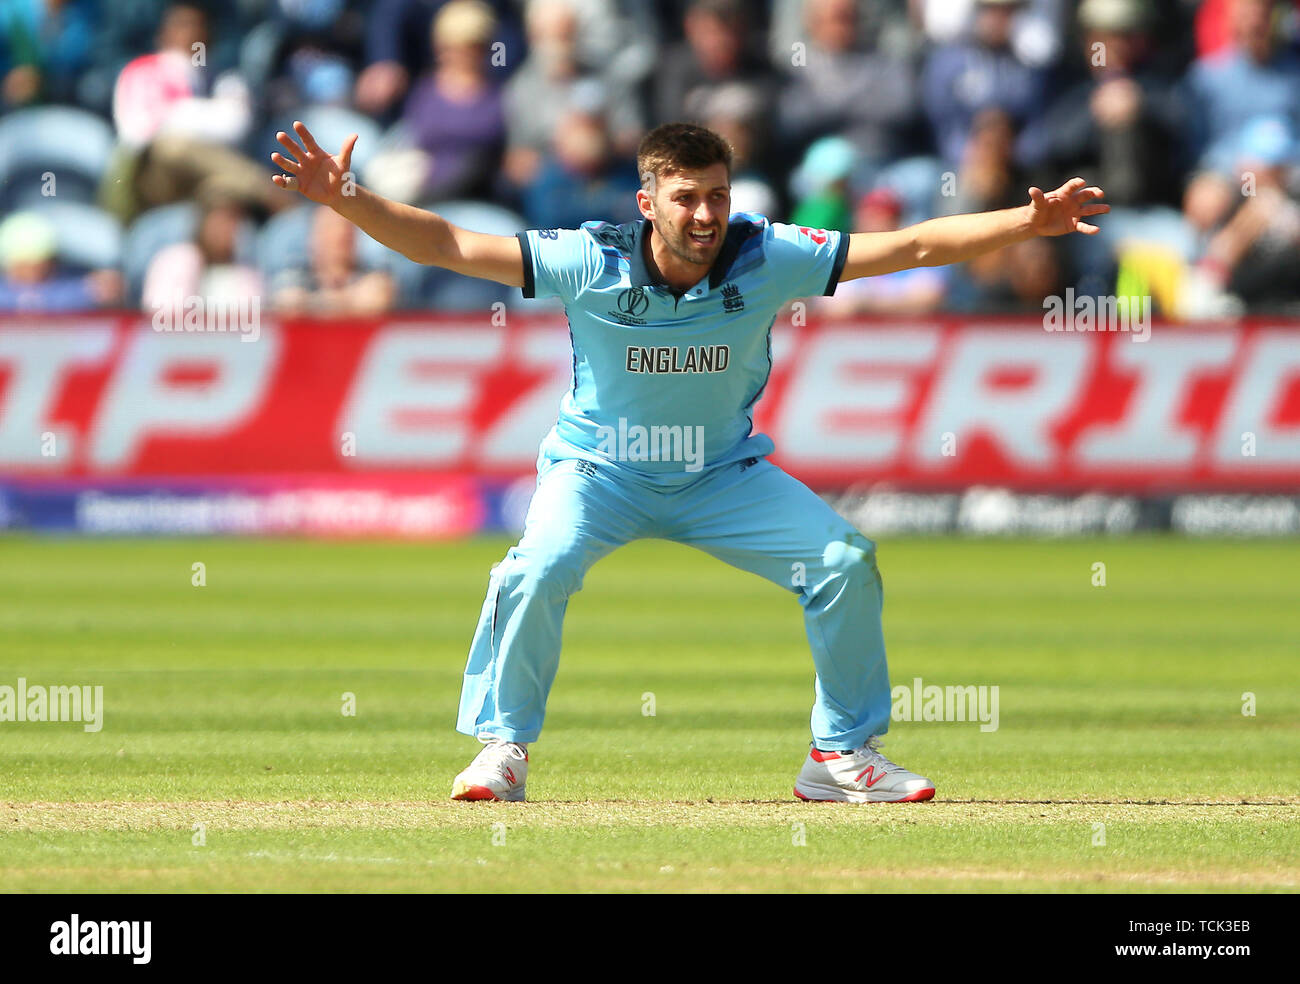 England's Mark Woods during an appeal during the ICC Cricket World Cup group stage match at the Cardiff Wales Stadium. Stock Photo